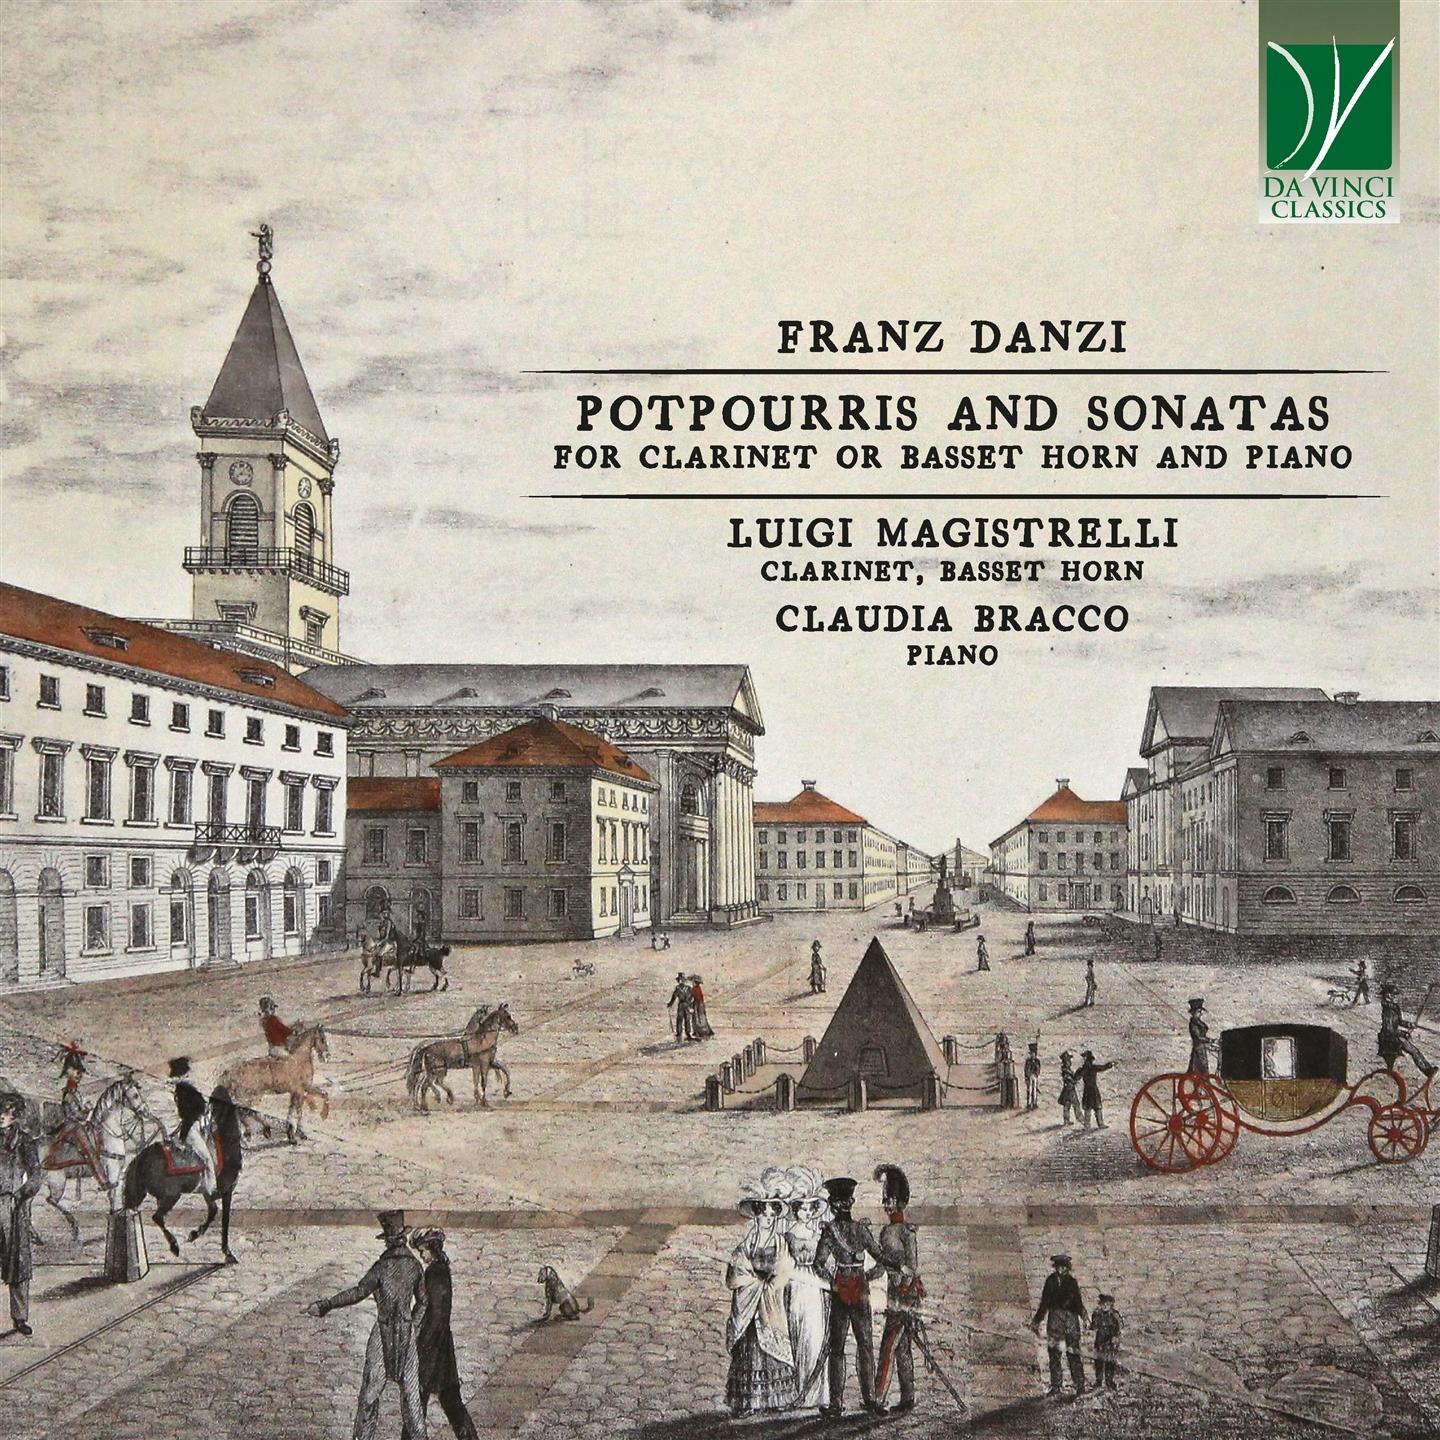 FRANZ DANZI: POT POURRIS AND SONATAS, FOR CLARINET OR BASSET HORN AND PIANO